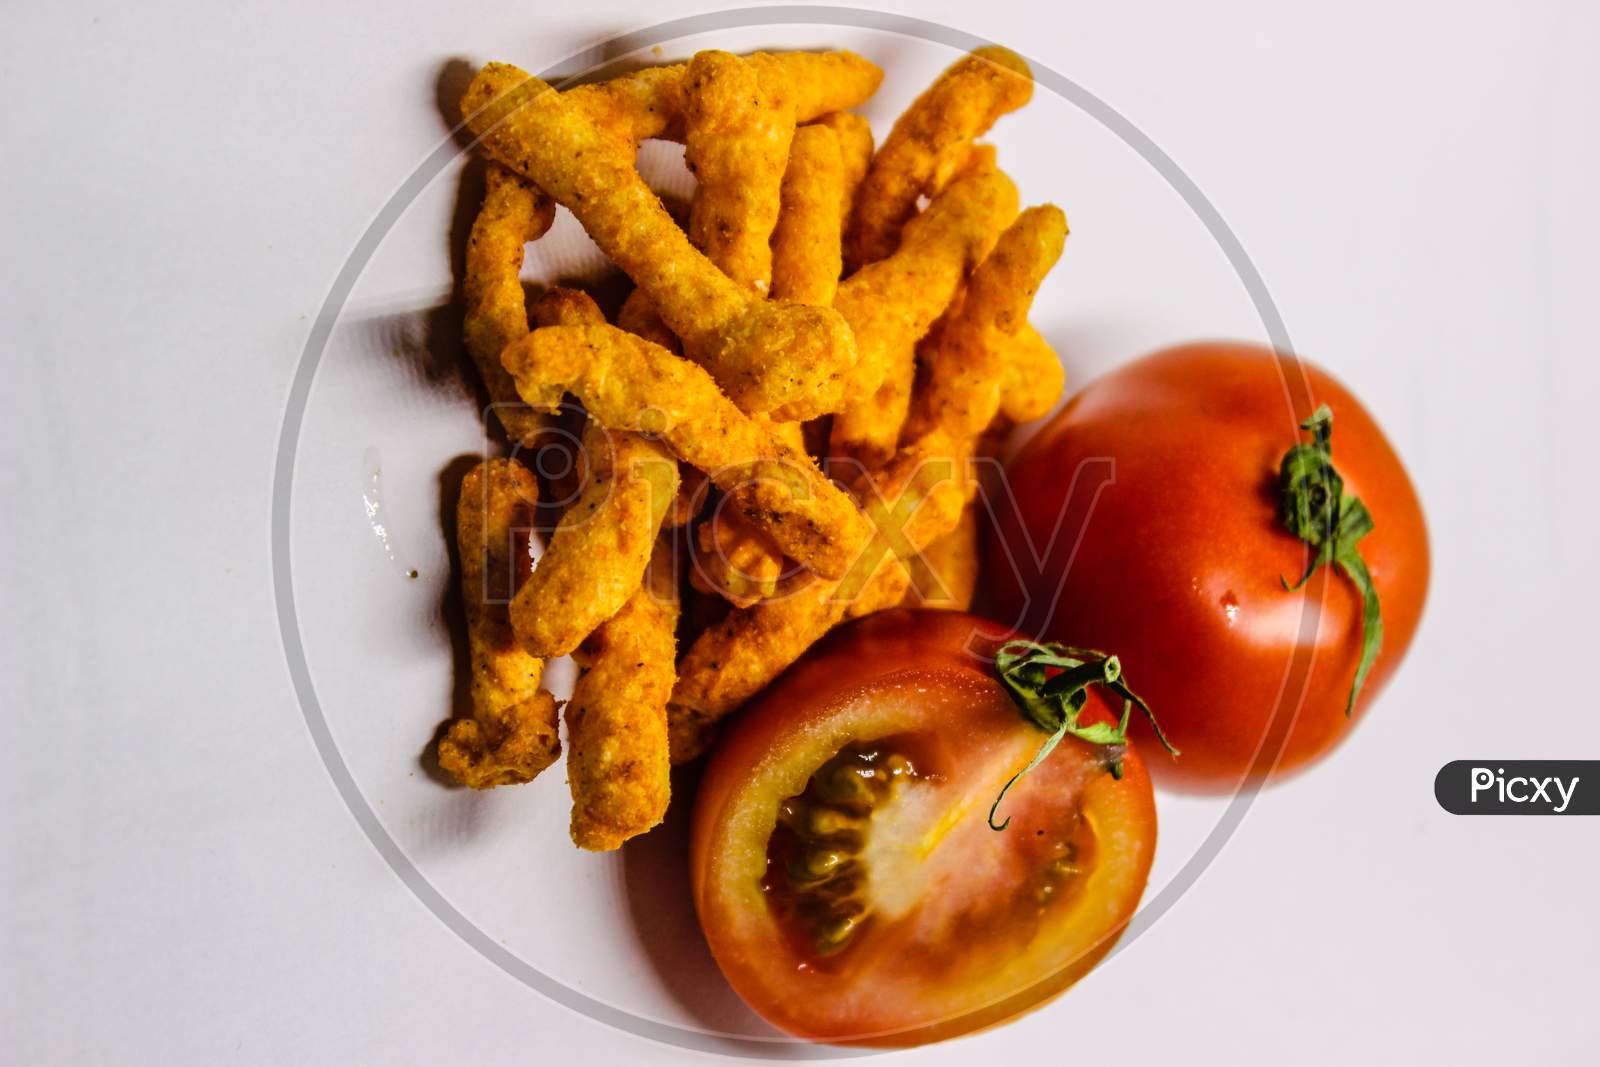 Tomato And Turmeric Roots Over An Isolated White Background